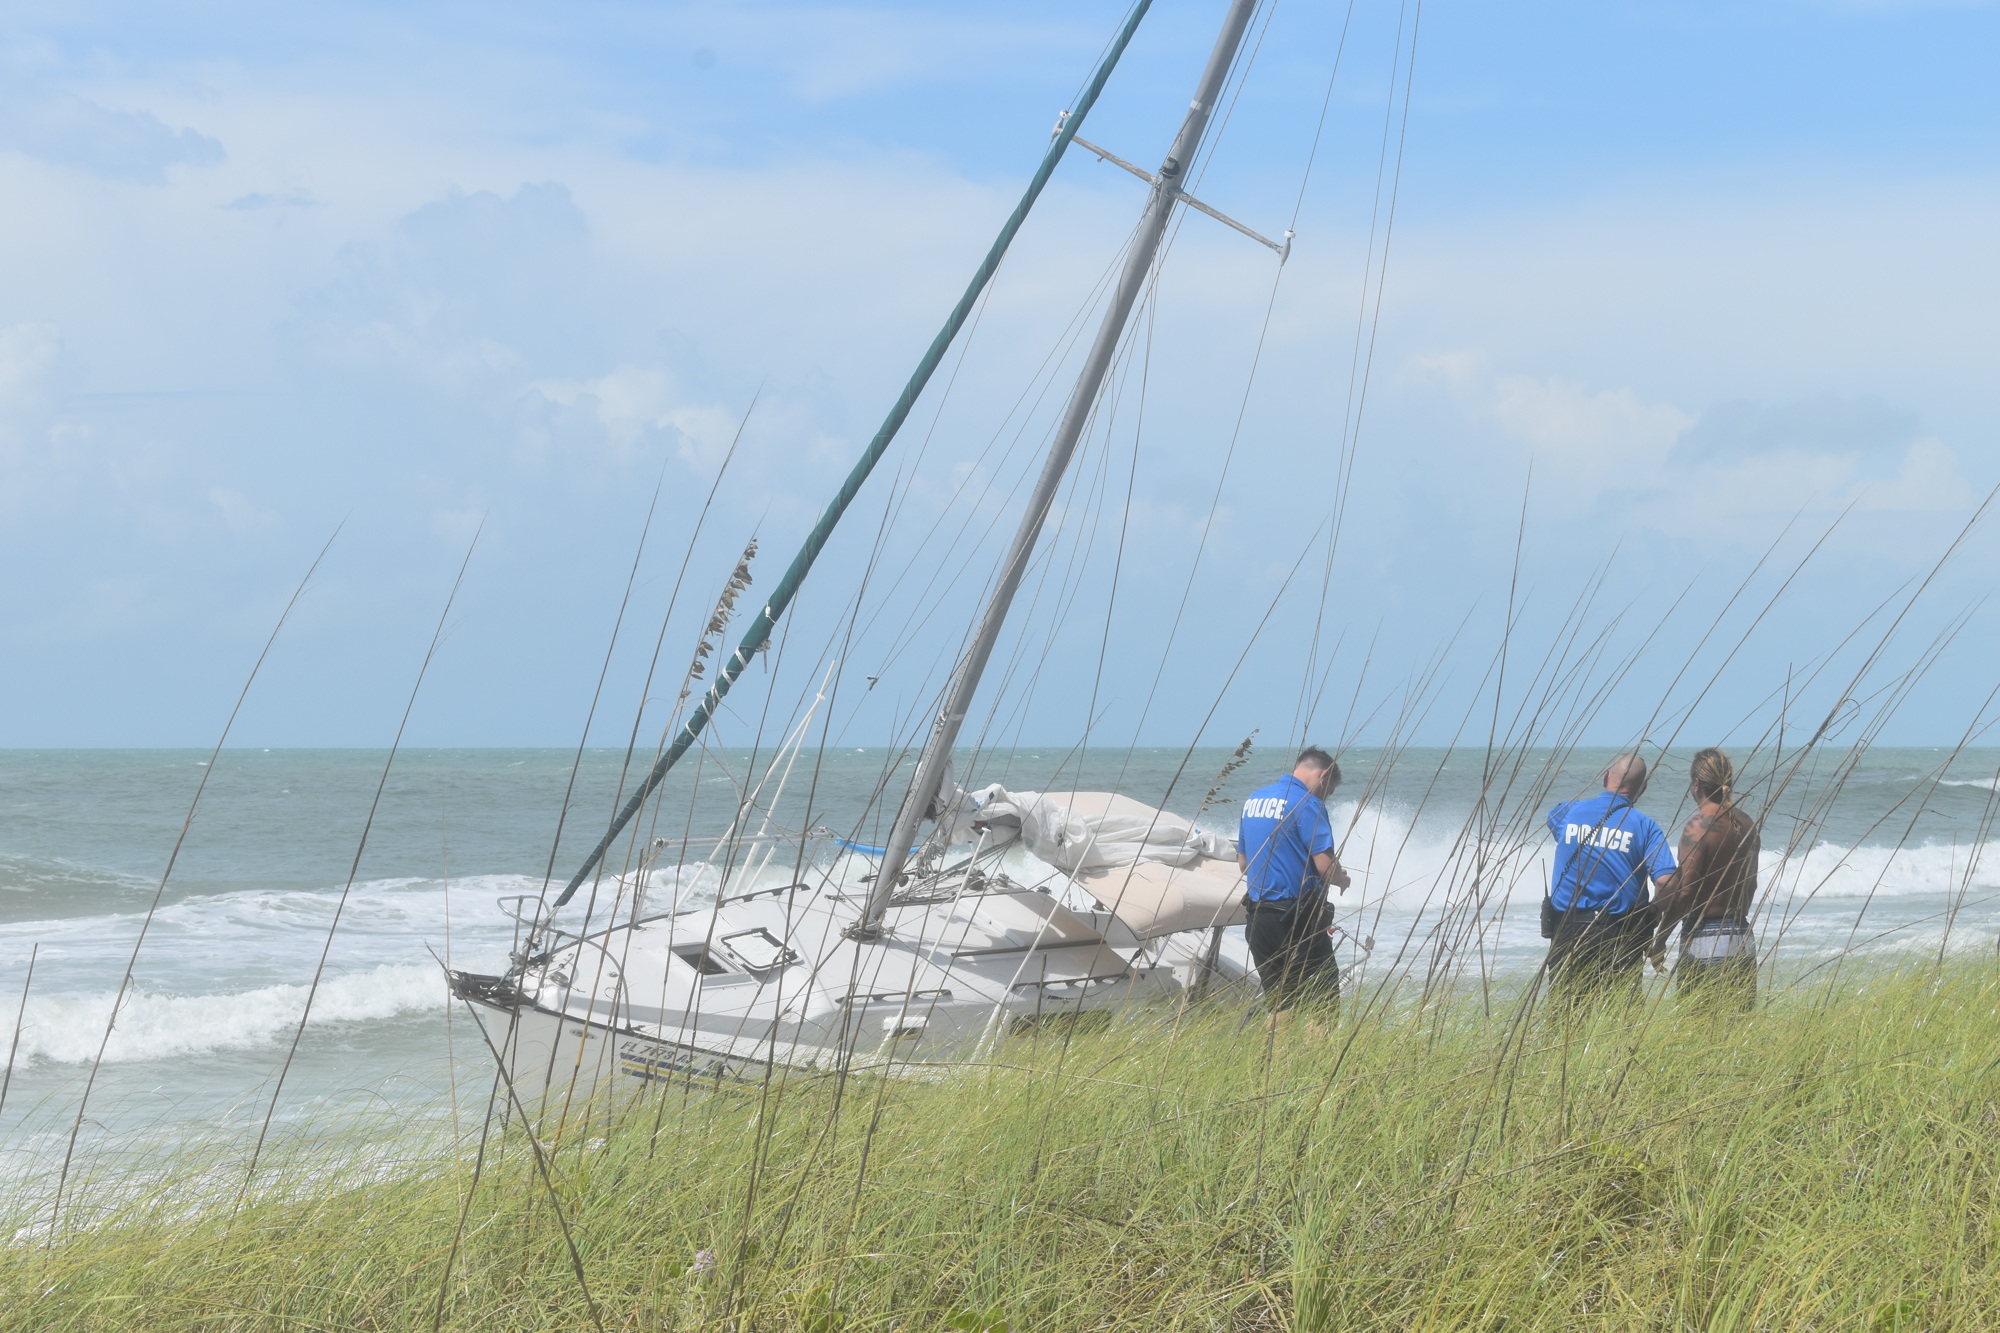 Mark Sternal speaks with Longboat Key police on Sept. 16 after his sailboat washed ashore near 4239 Gulf of Mexico Drive.